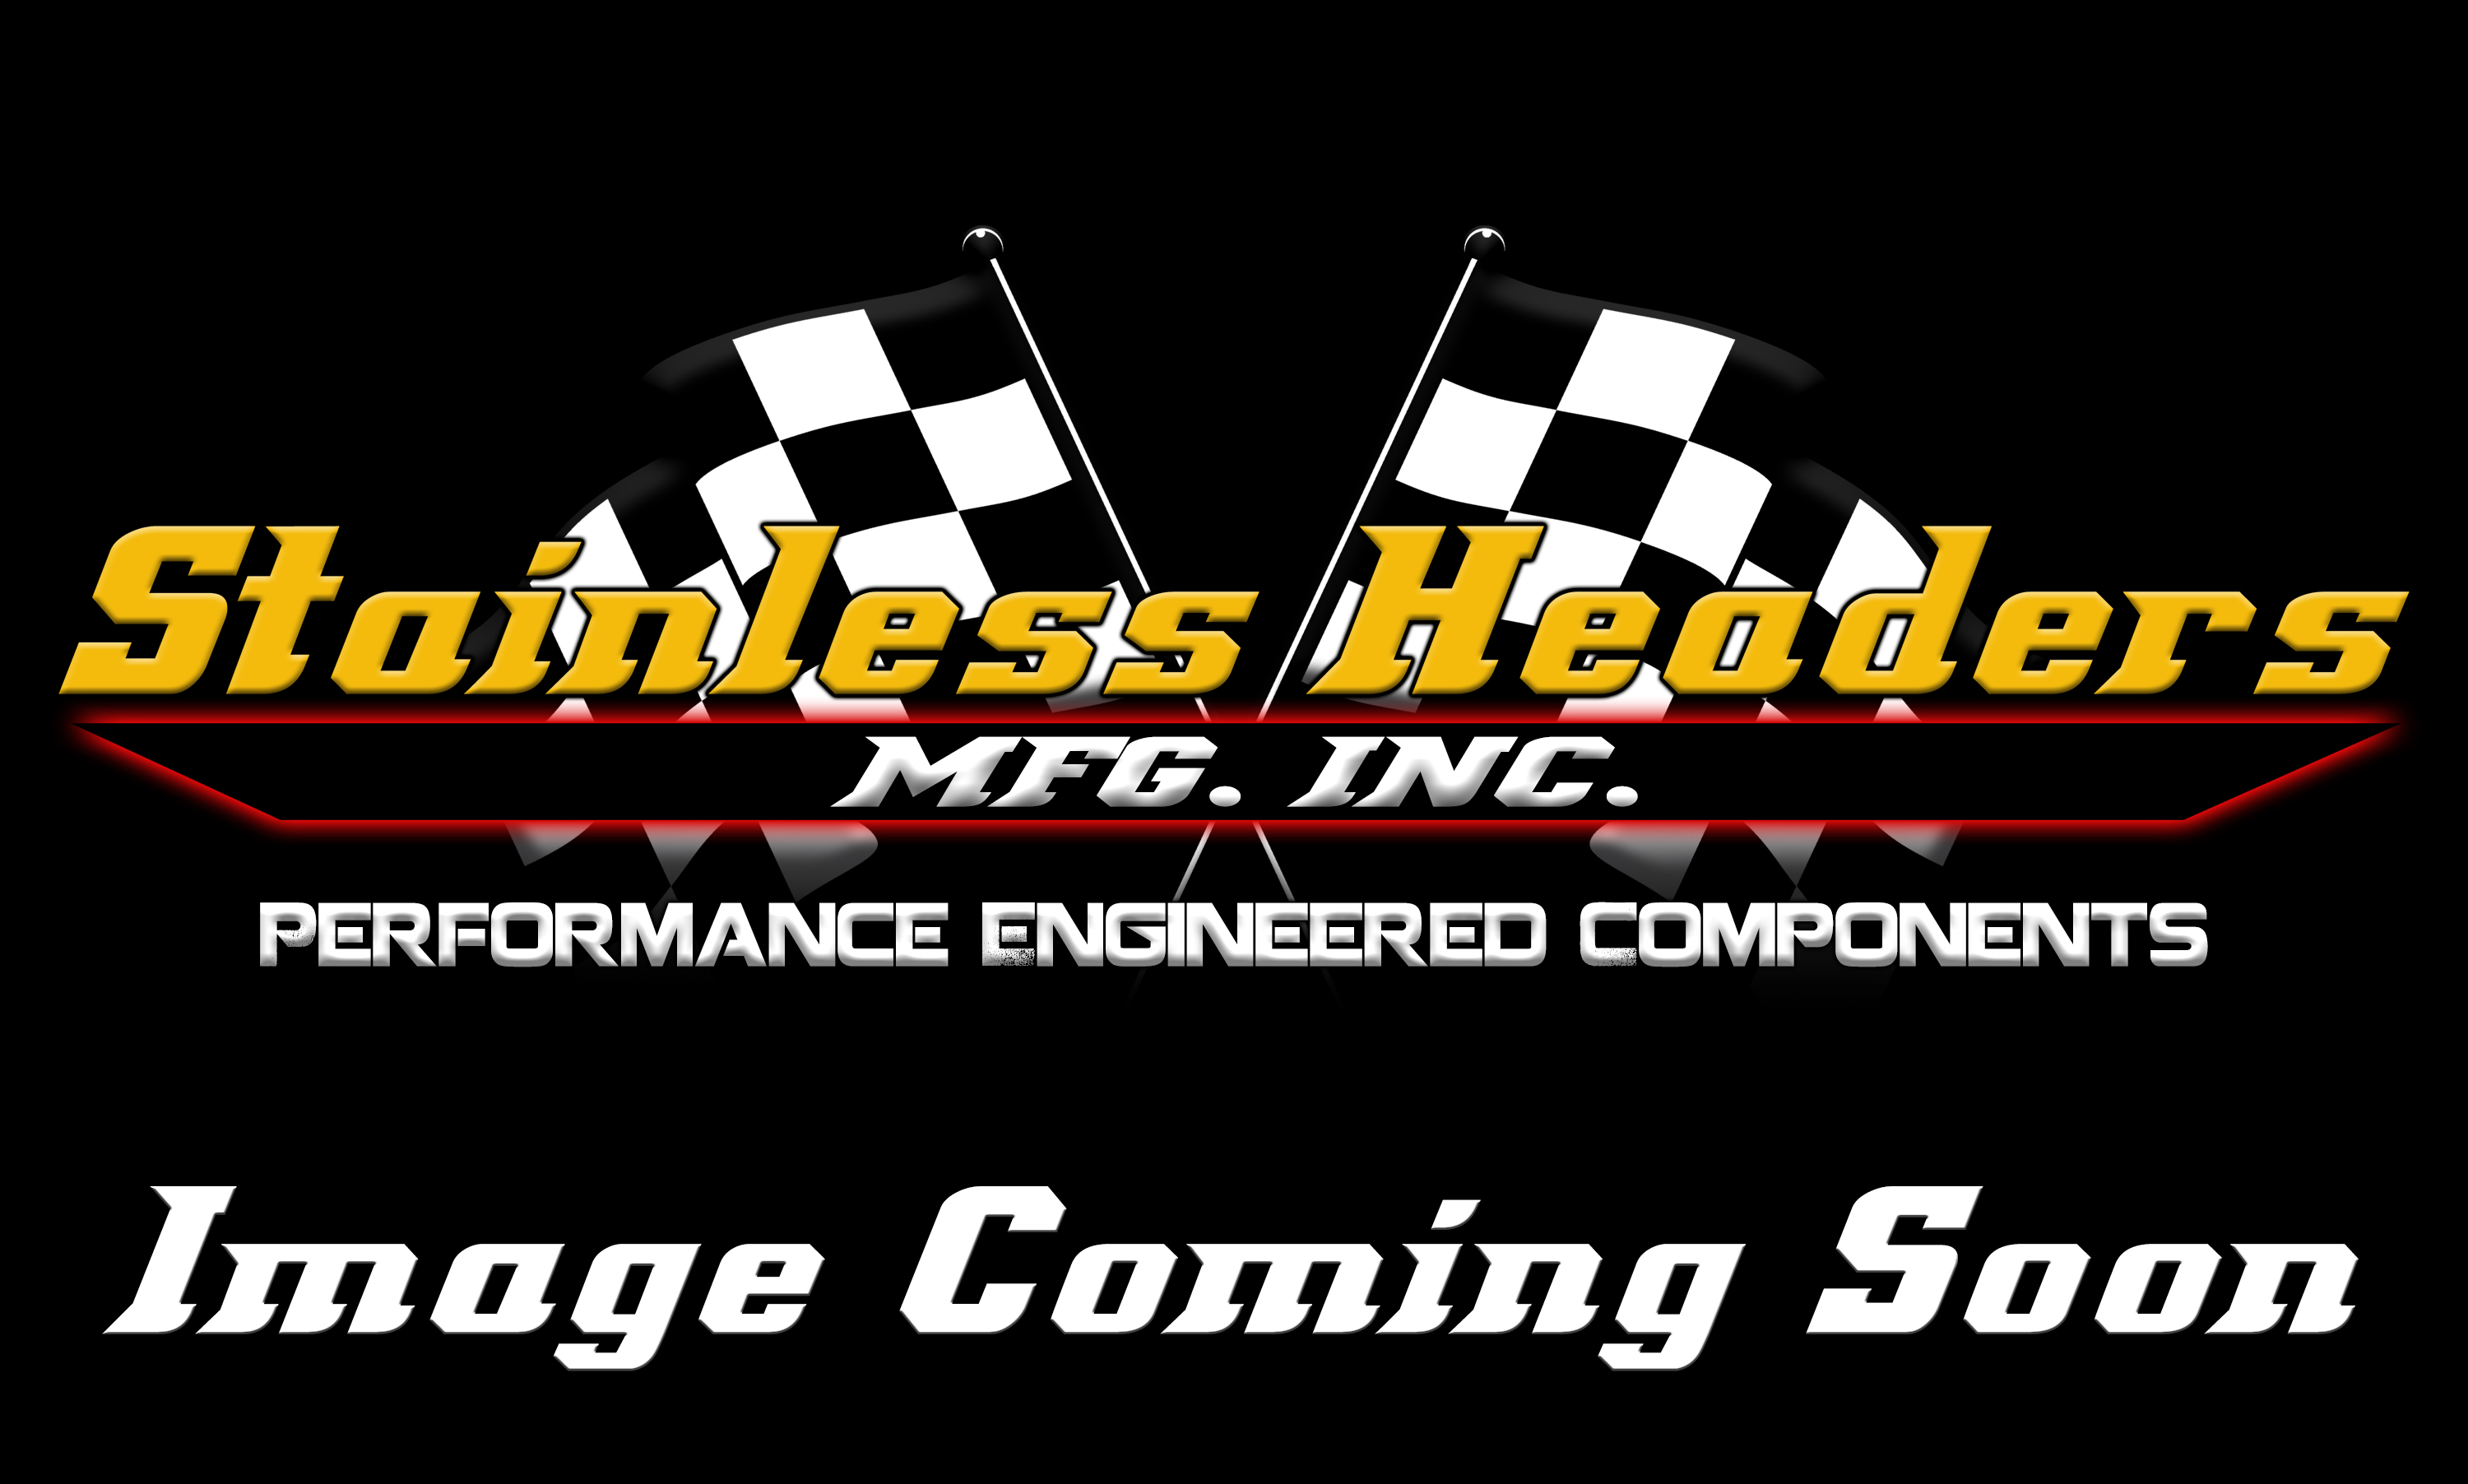 Stainless Headers - 2 1/2" Primary 3 into 1 Performance Merge Collector-16ga 321ss